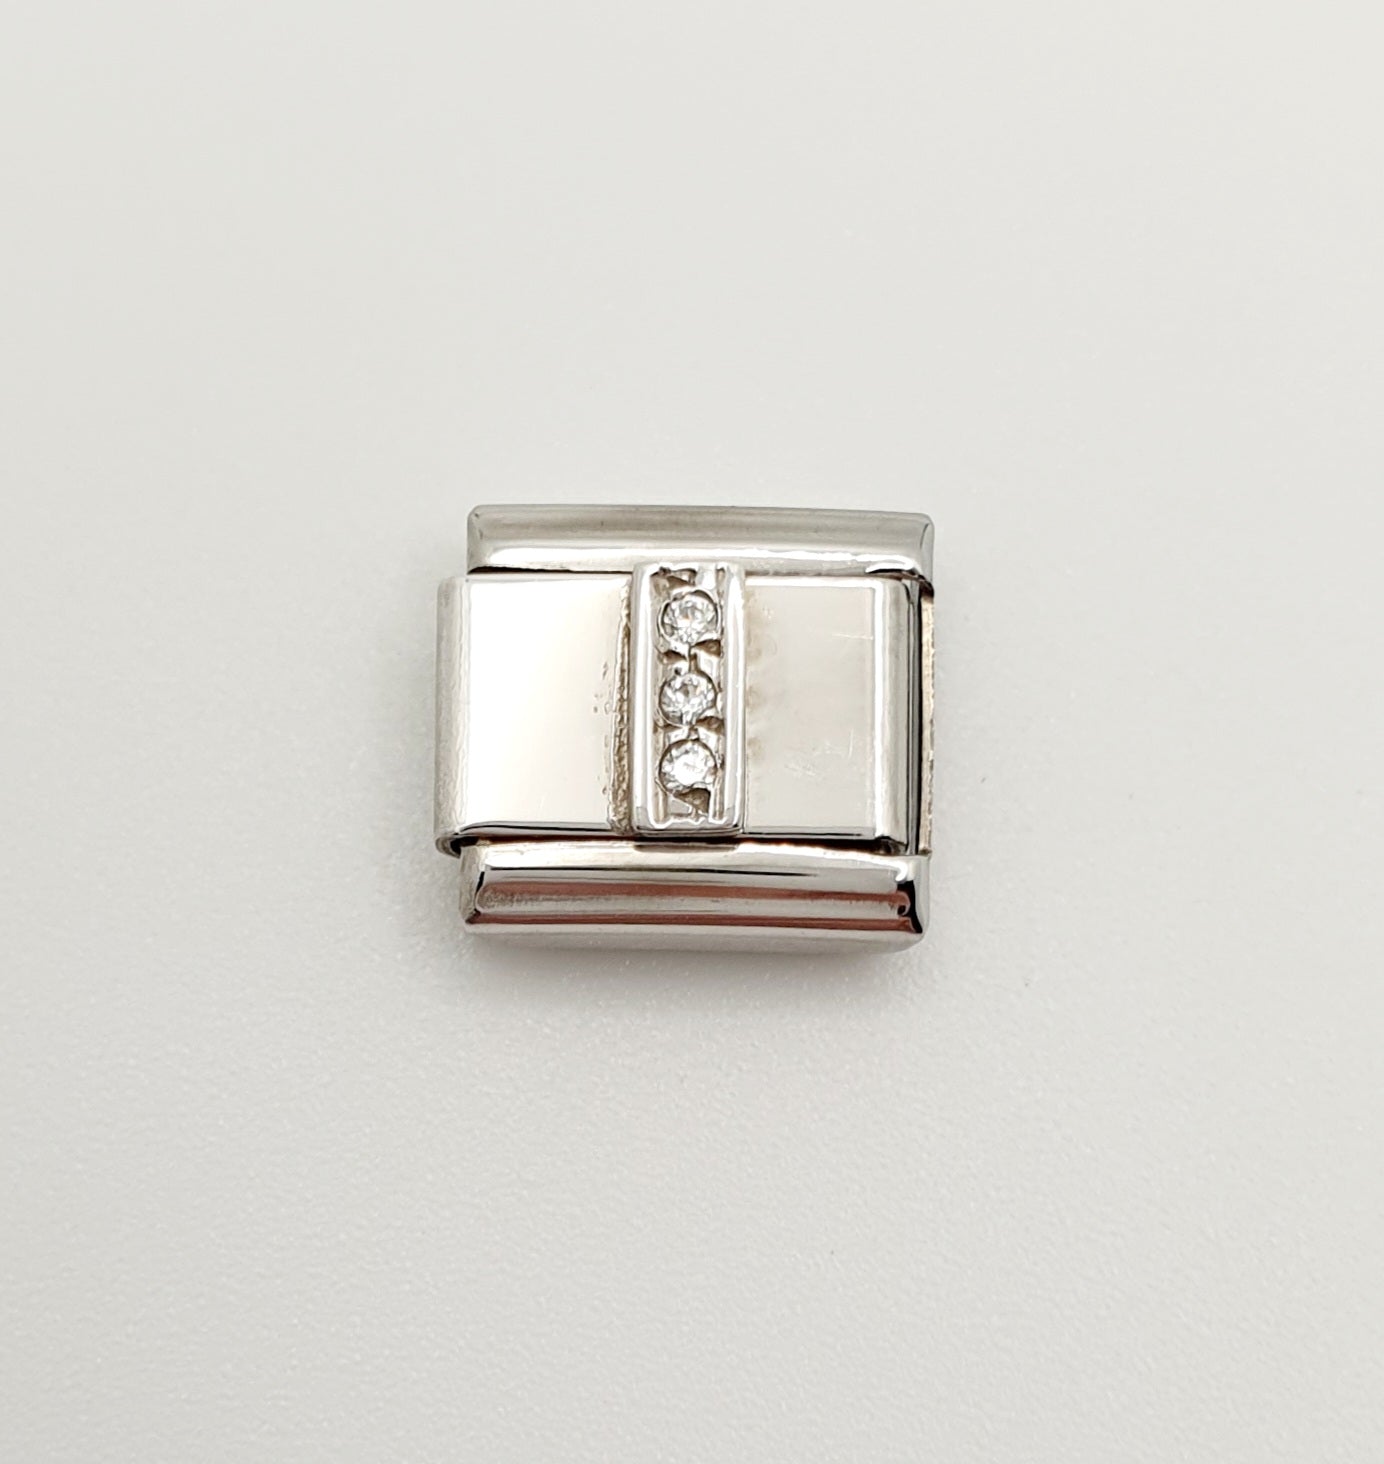 Nomination Charm Link "I" Stainless Steel with CZ's & 925 Silver, 330301 09